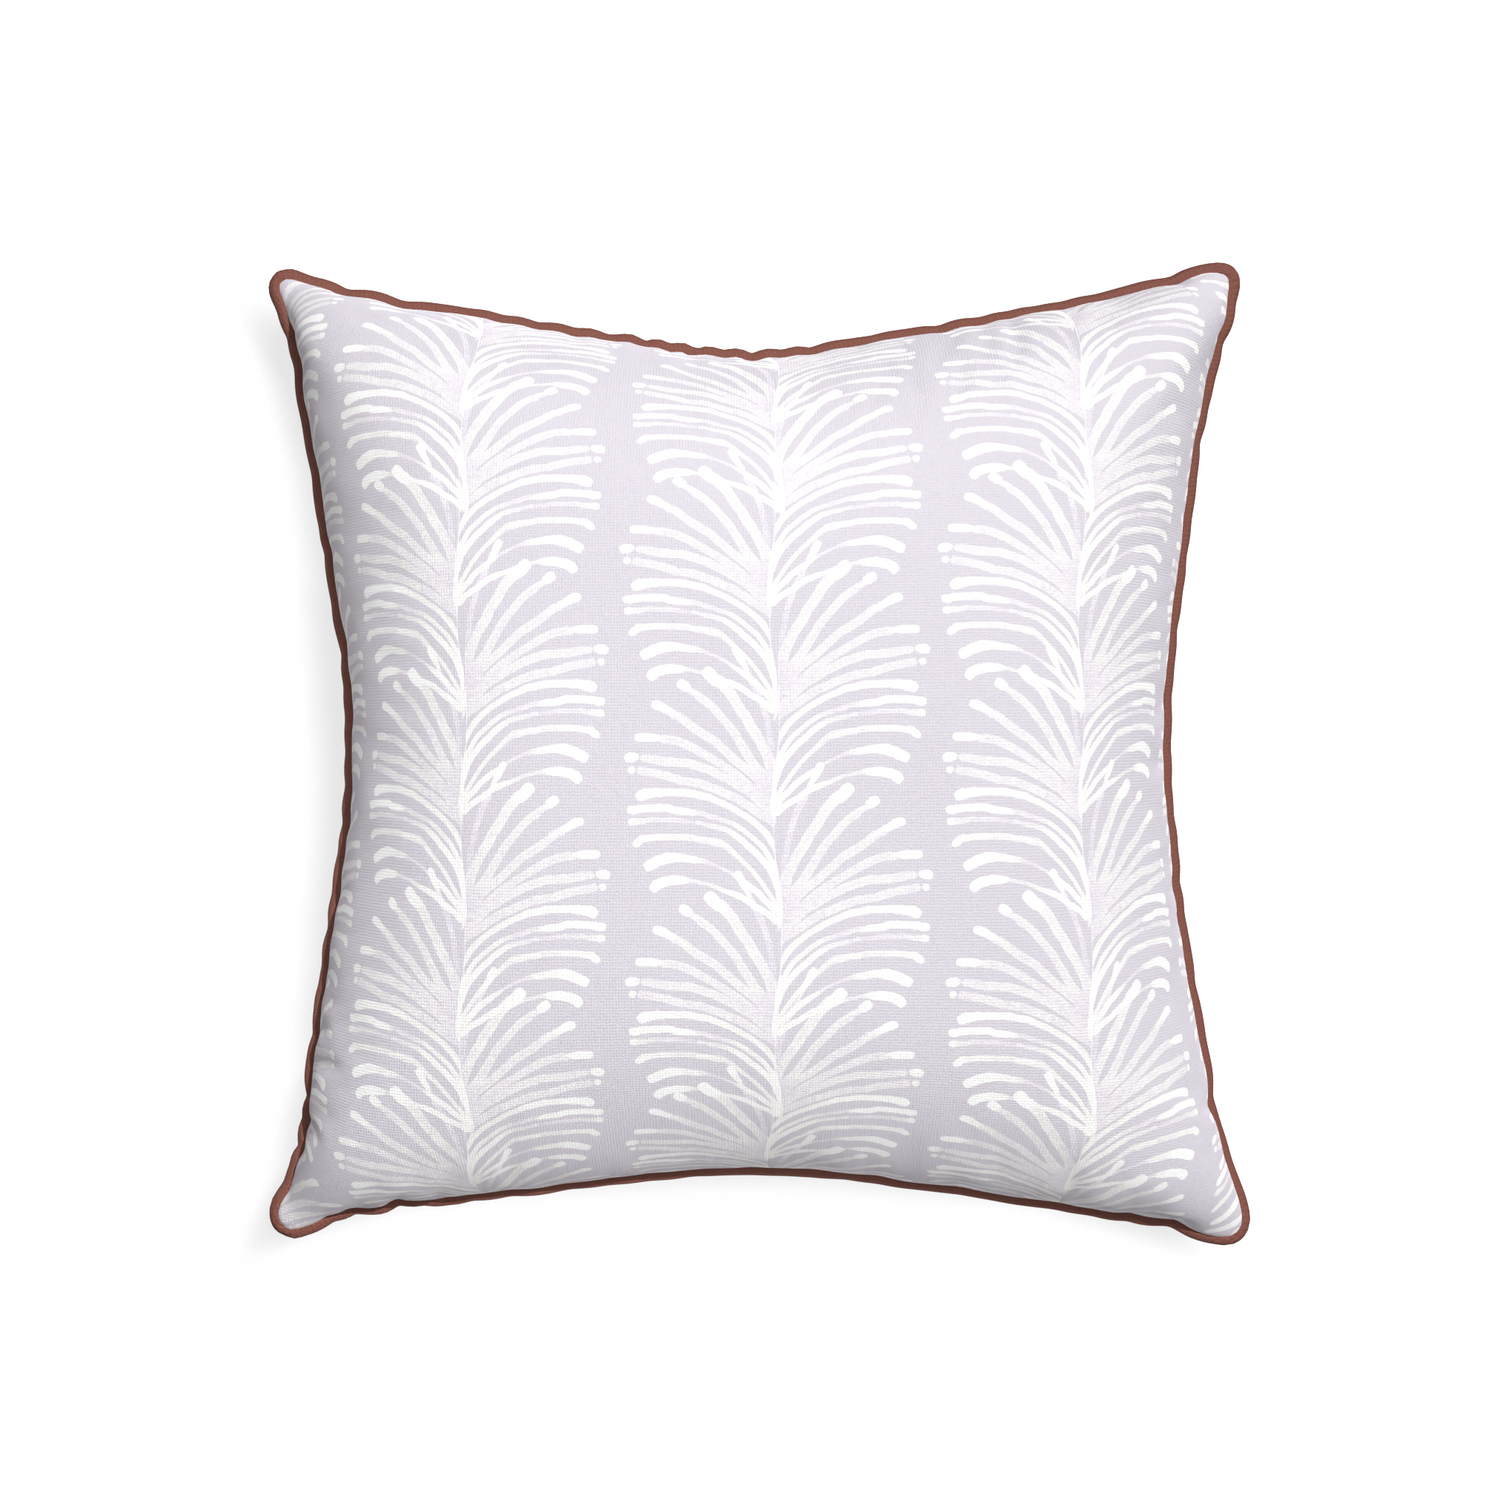 22-square emma lavender custom lavender botanical stripepillow with w piping on white background